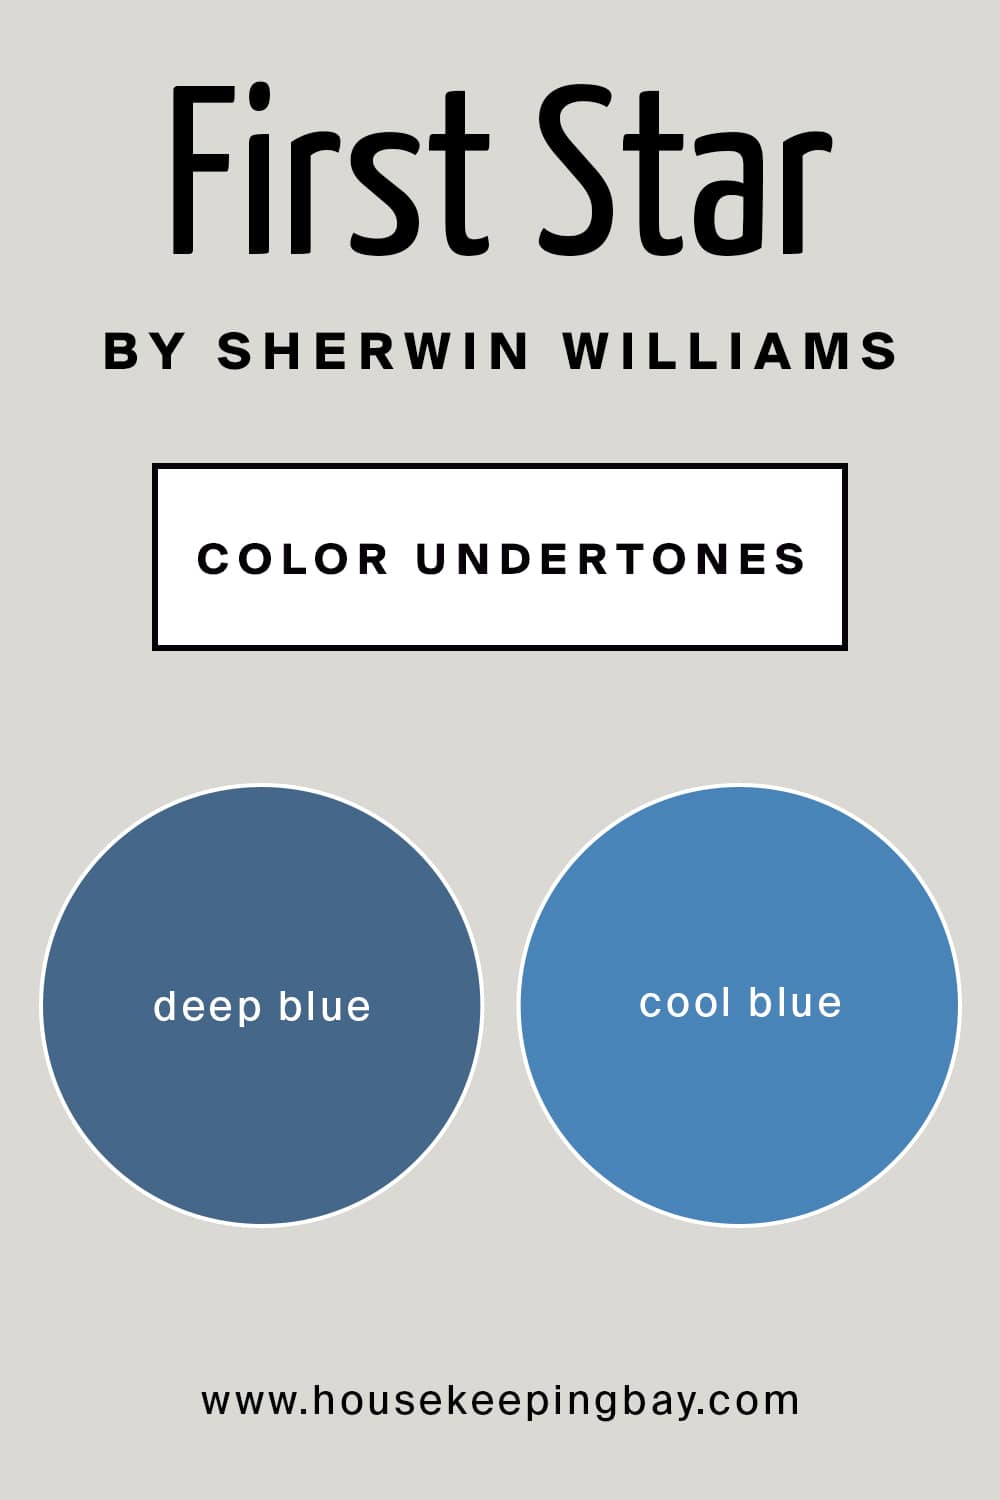 First Star by Sherwin Williams Color Undertones